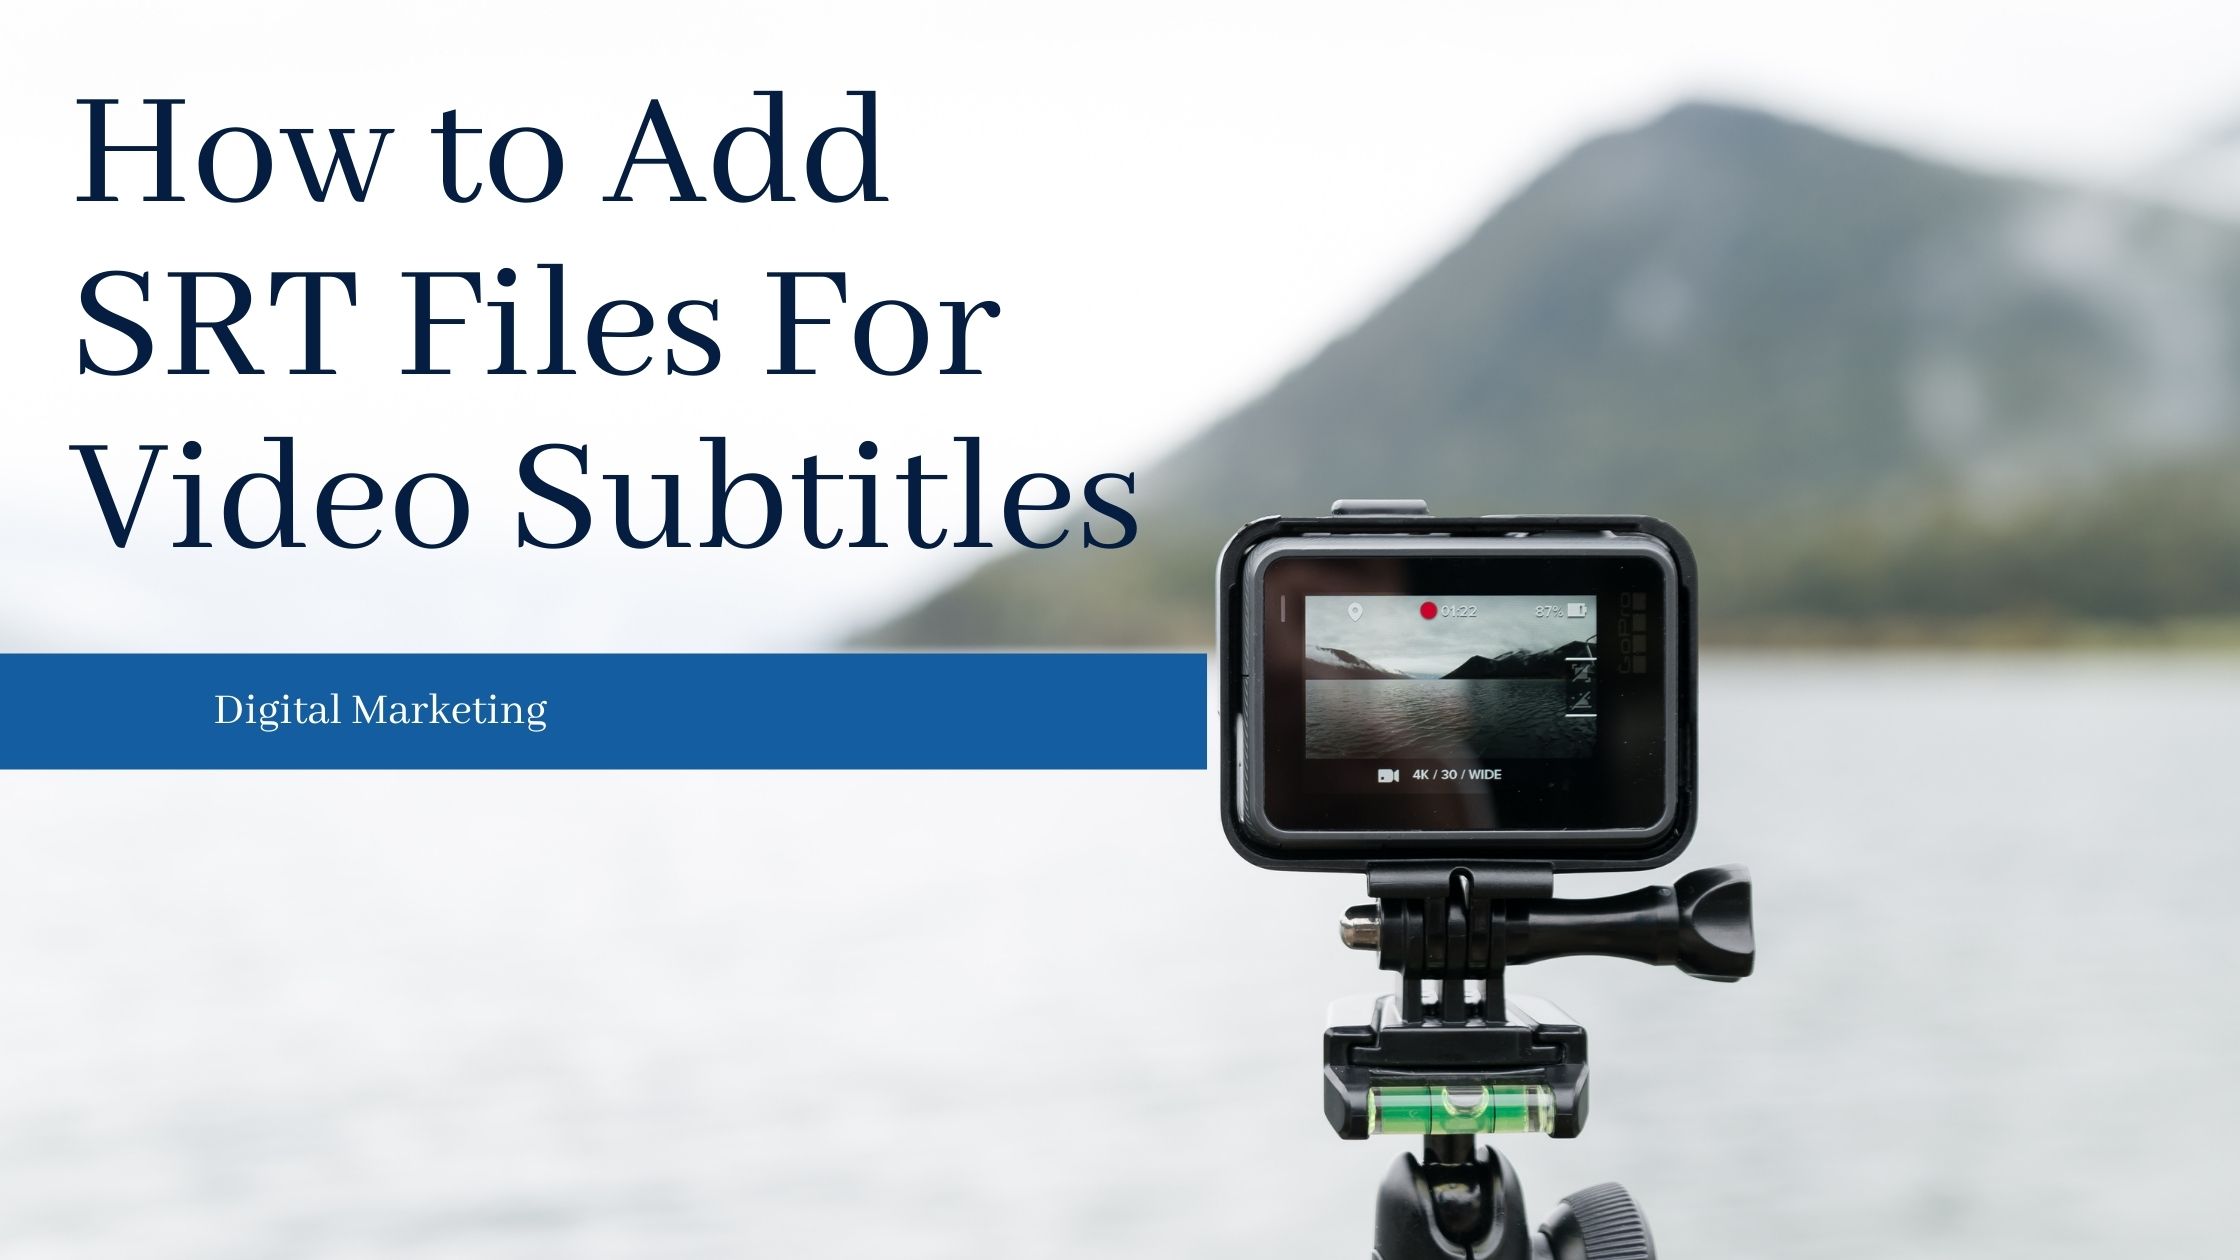 In this blog post, we'll show you how to add SRT subtitles to a video using YouTube.